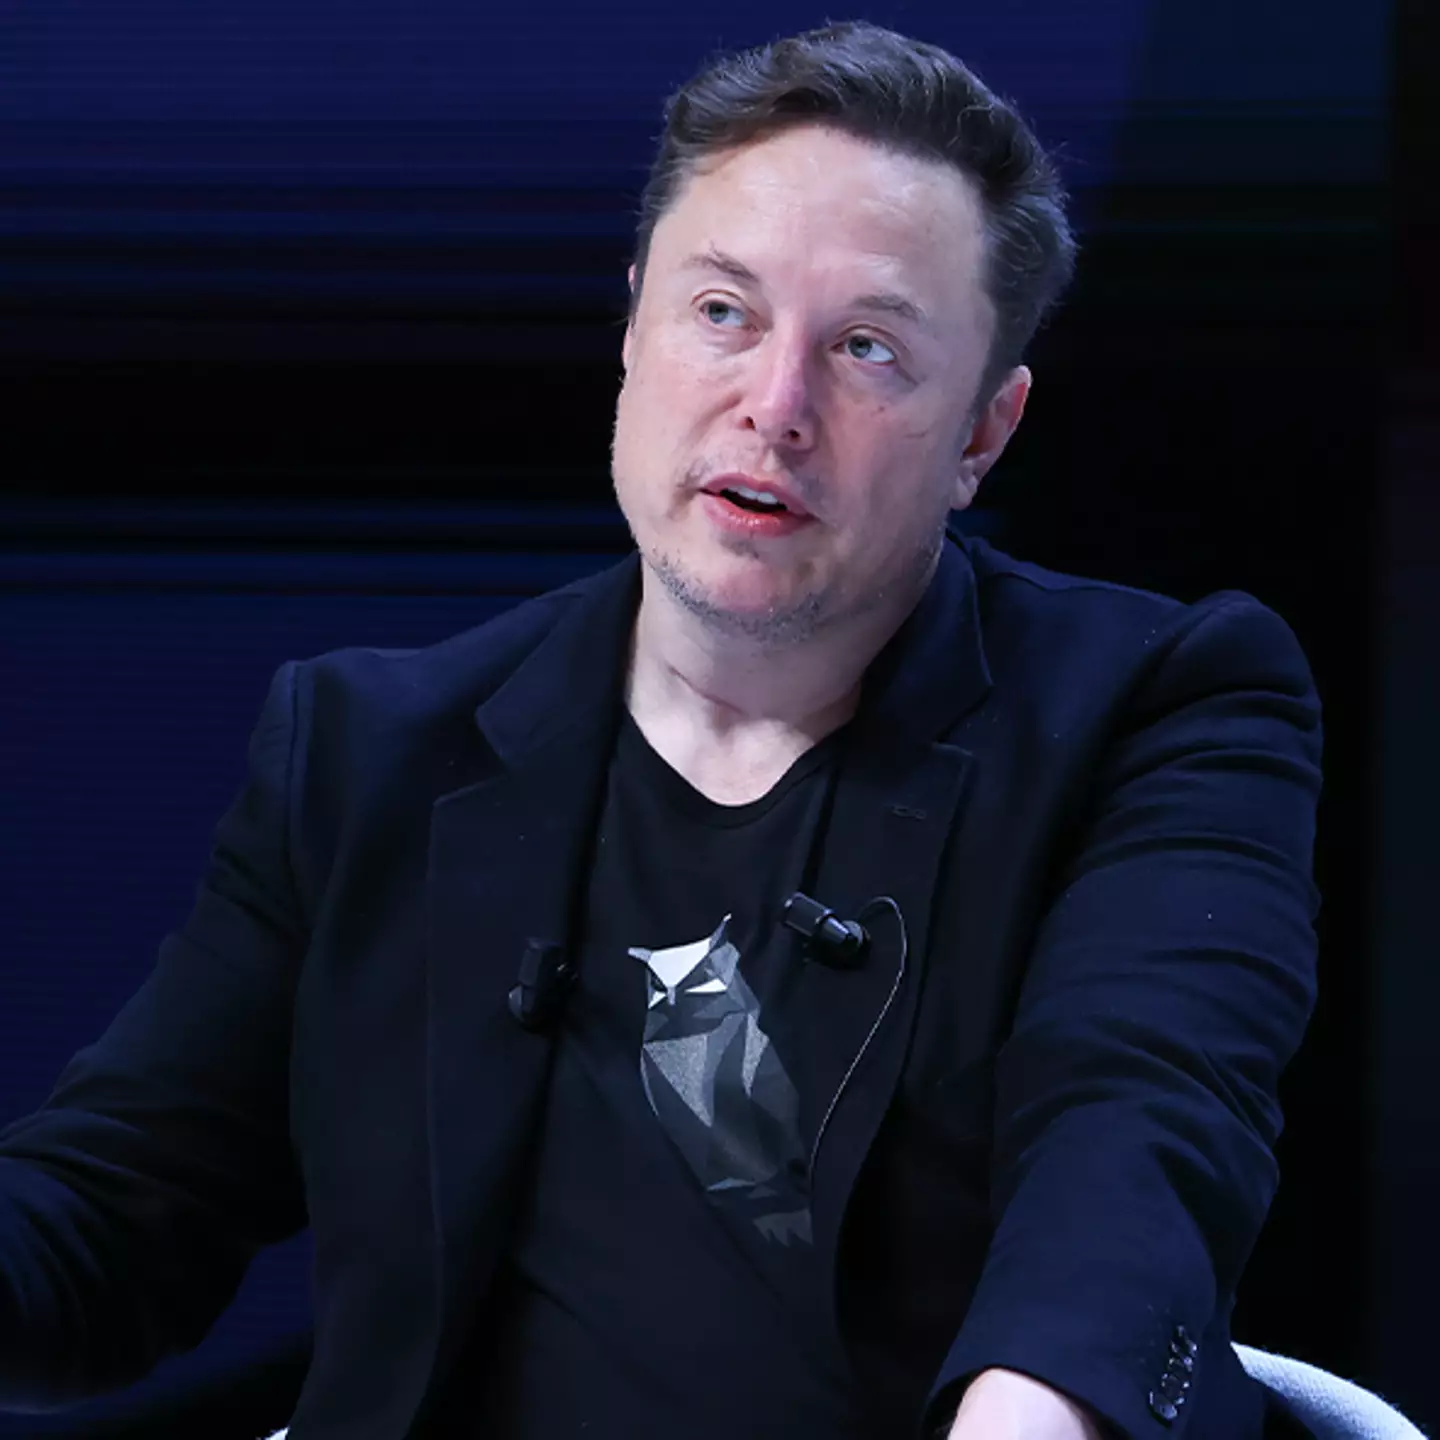 Elon Musk says we'll have 20,000,000,000 humanoid robots not too far in the future